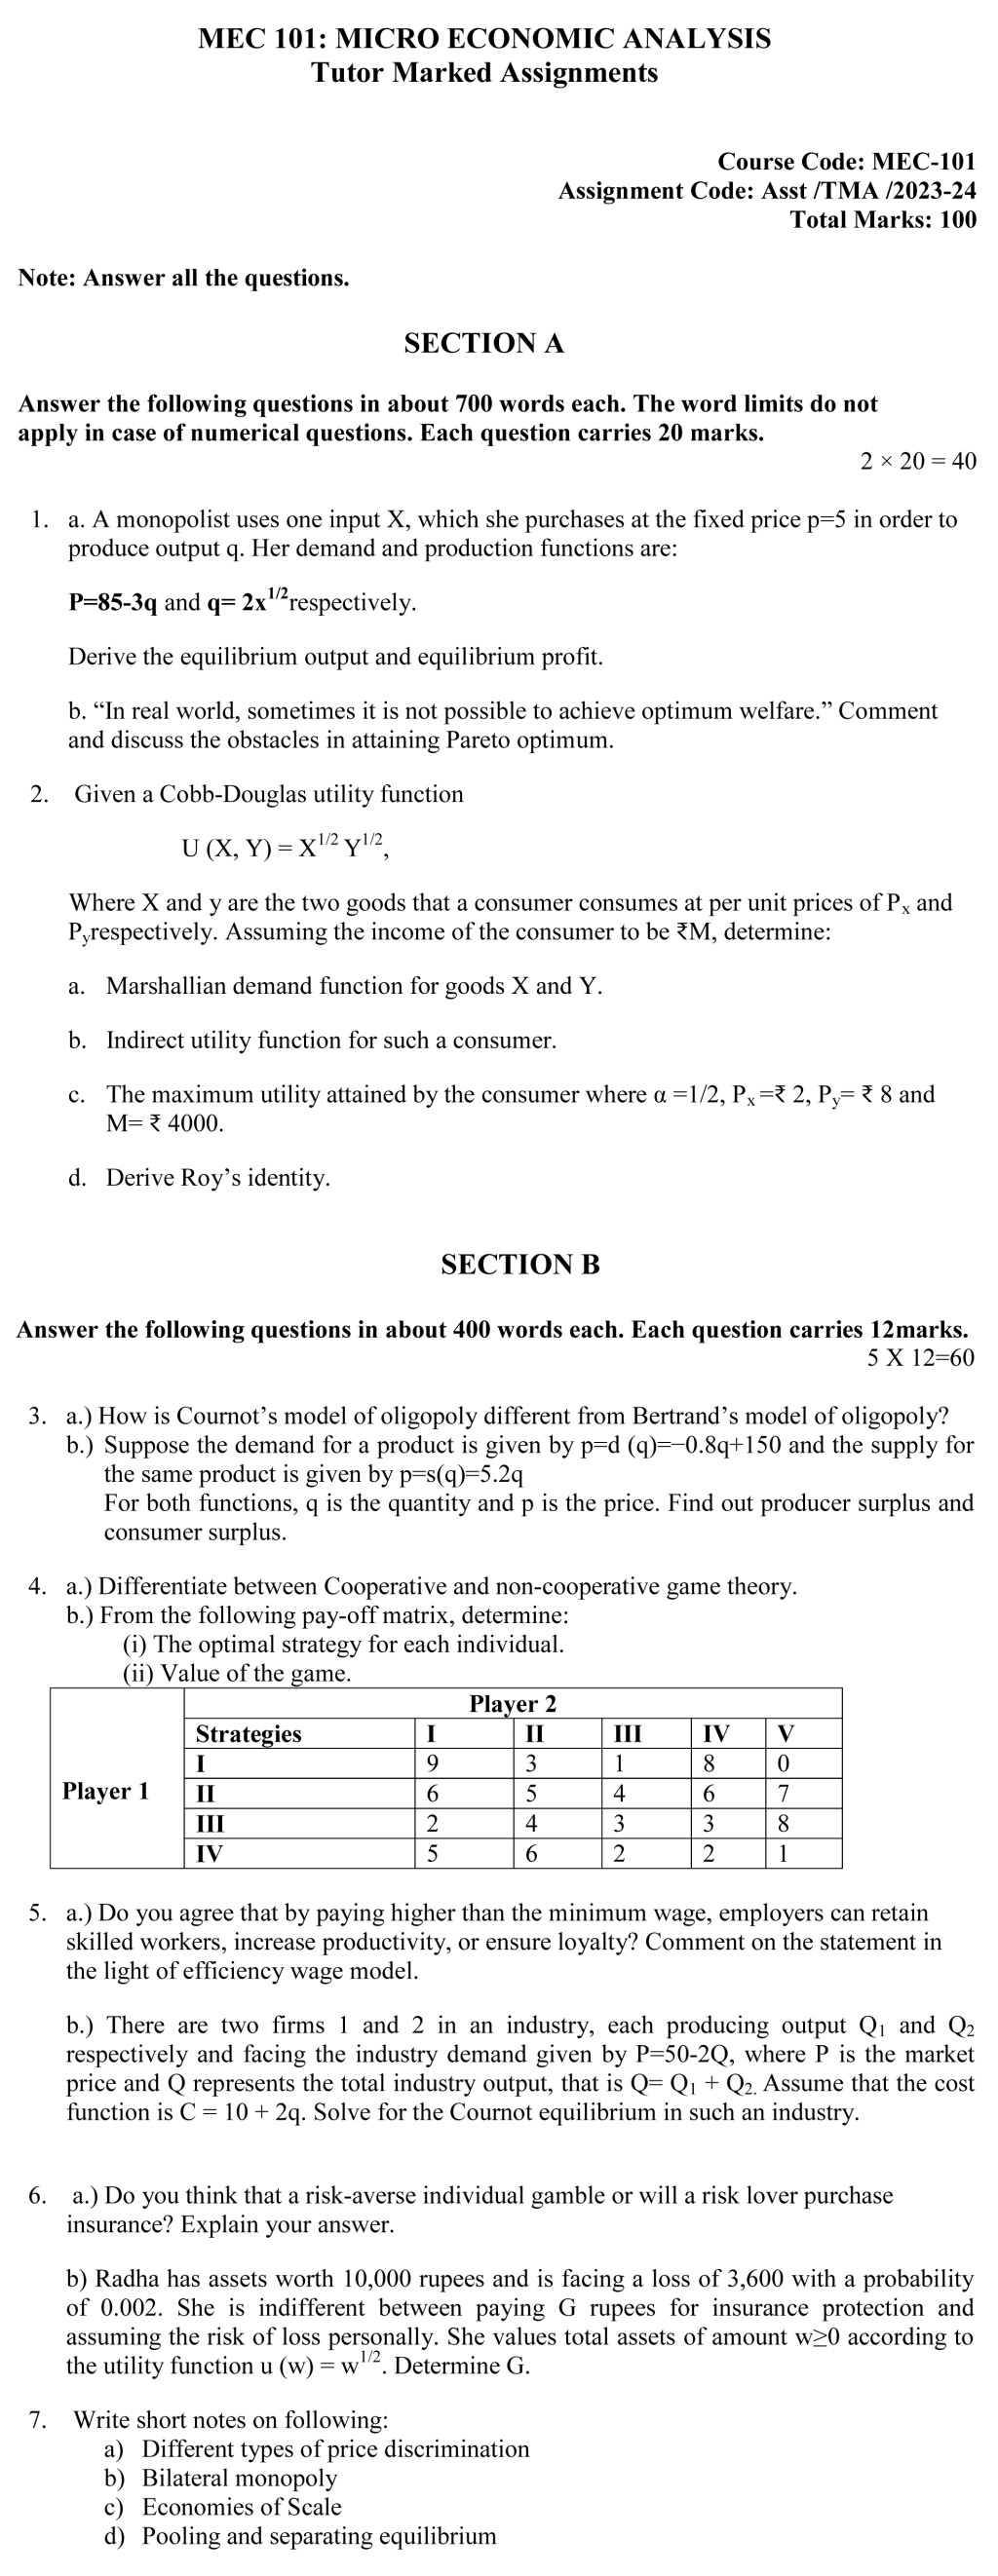 IGNOU MEC-101 - Microeconomic Analysis Latest Solved Assignment-July 2023 – January 2024